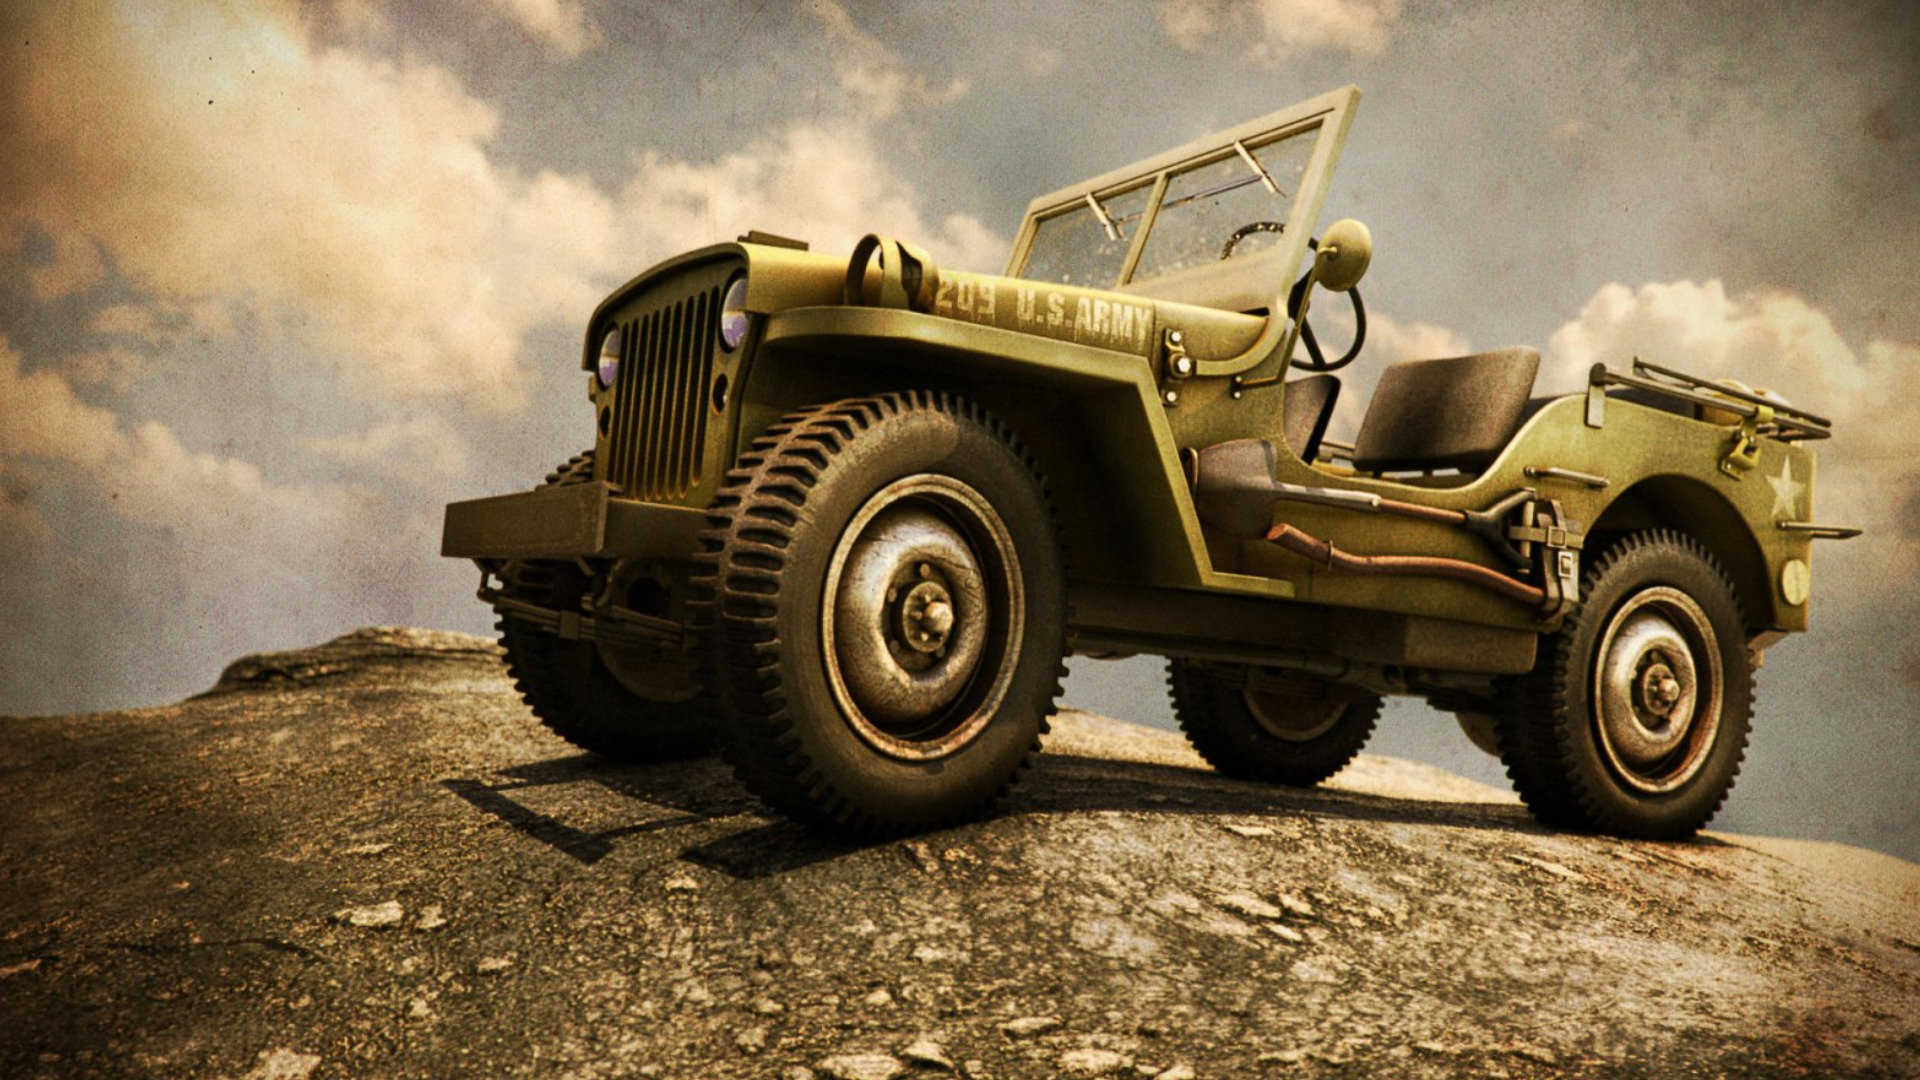 Awesome Vehicle Military free wallpaper ID:50433 for hd 1080p desktop